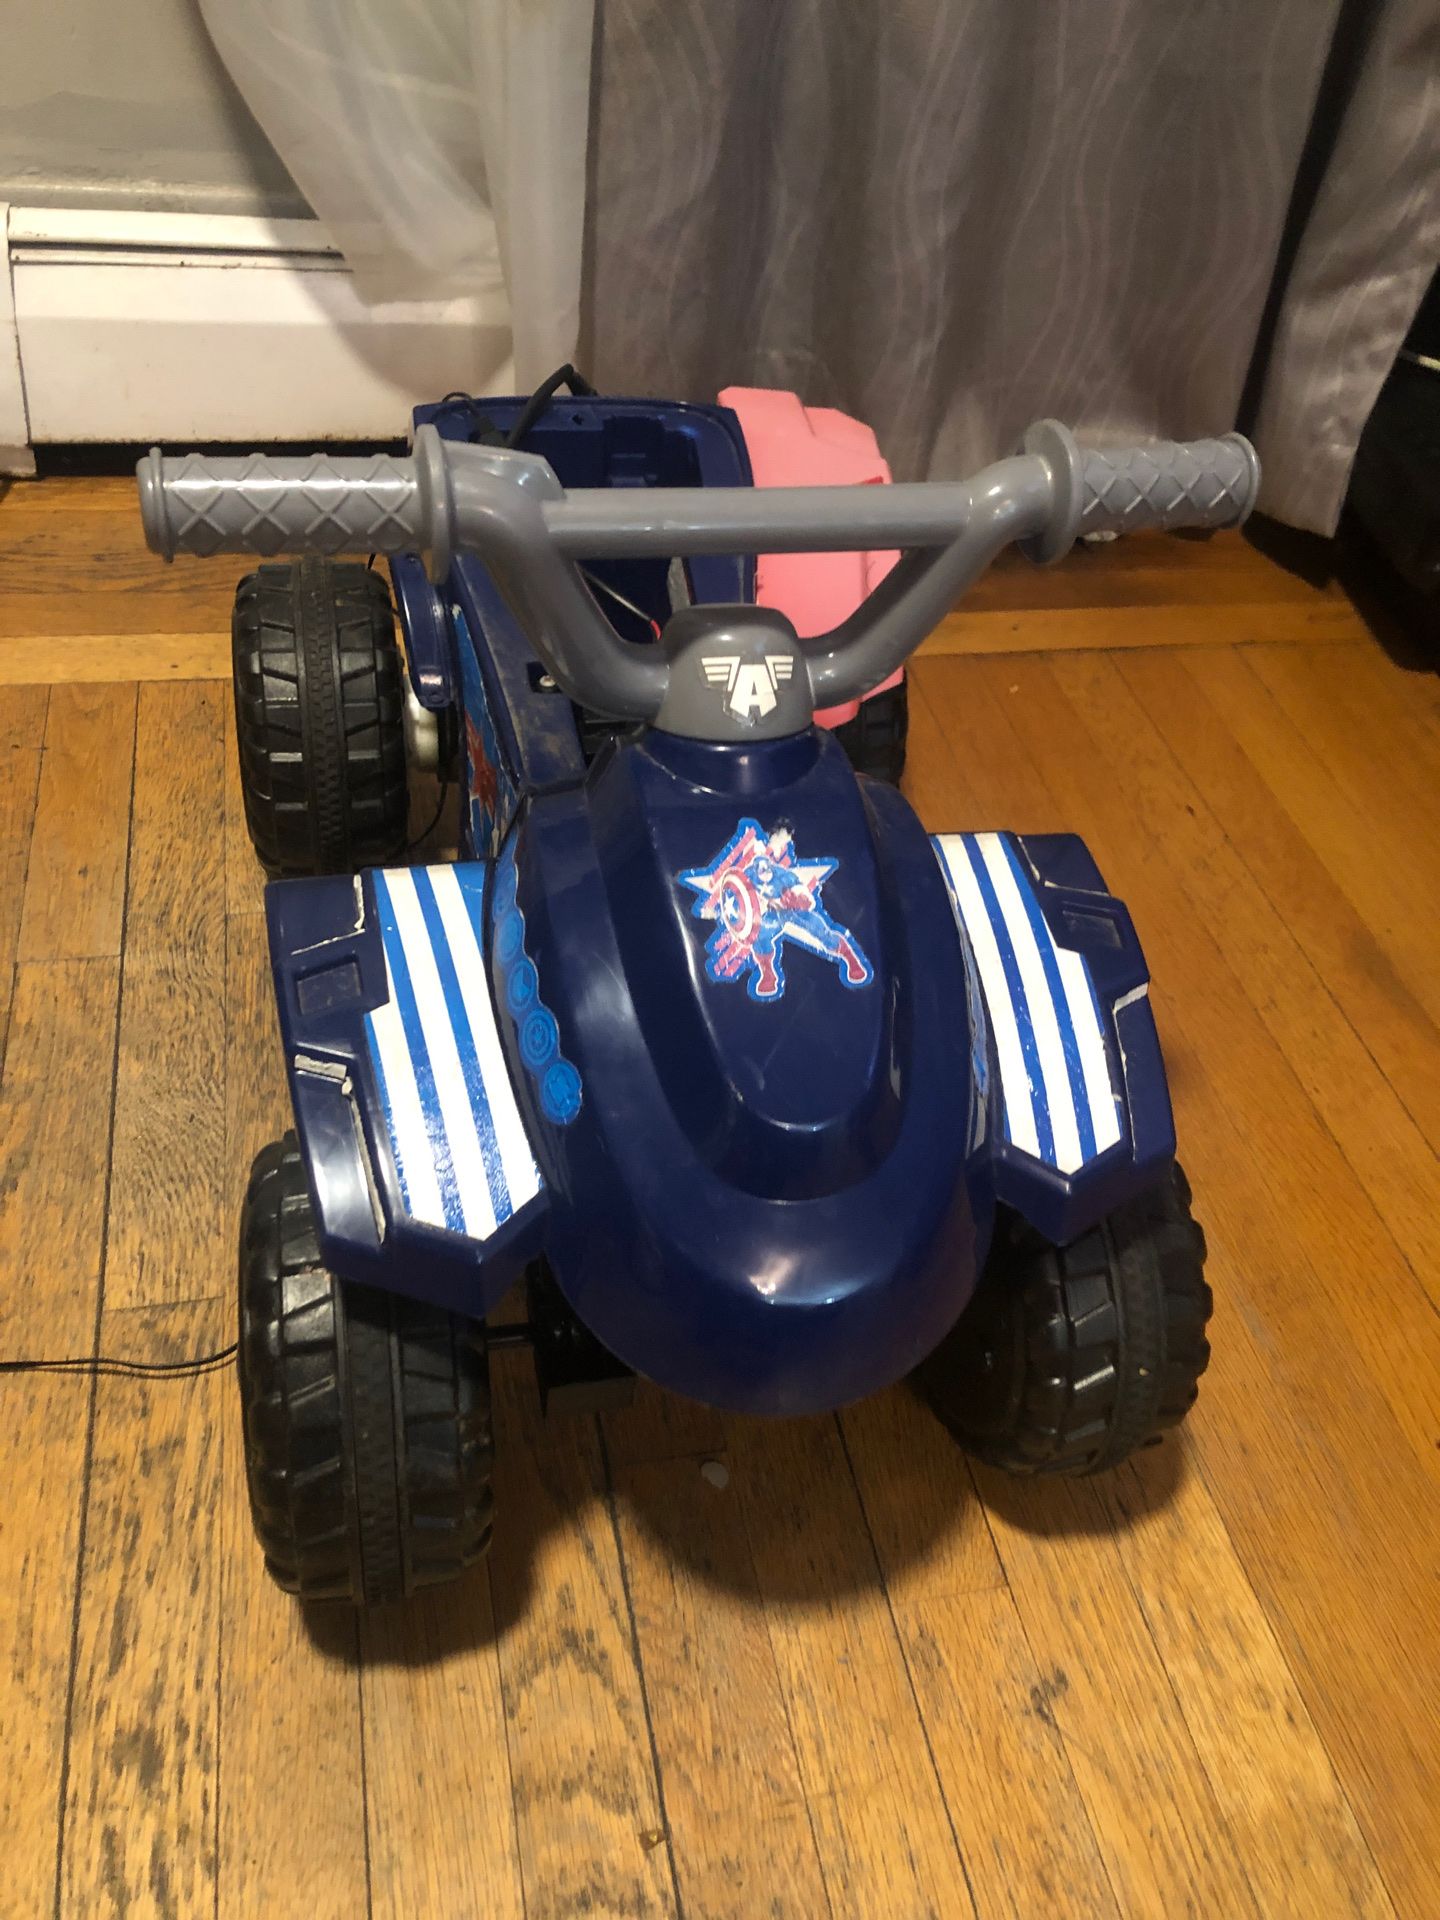 Captain America electric quad still works, with charger